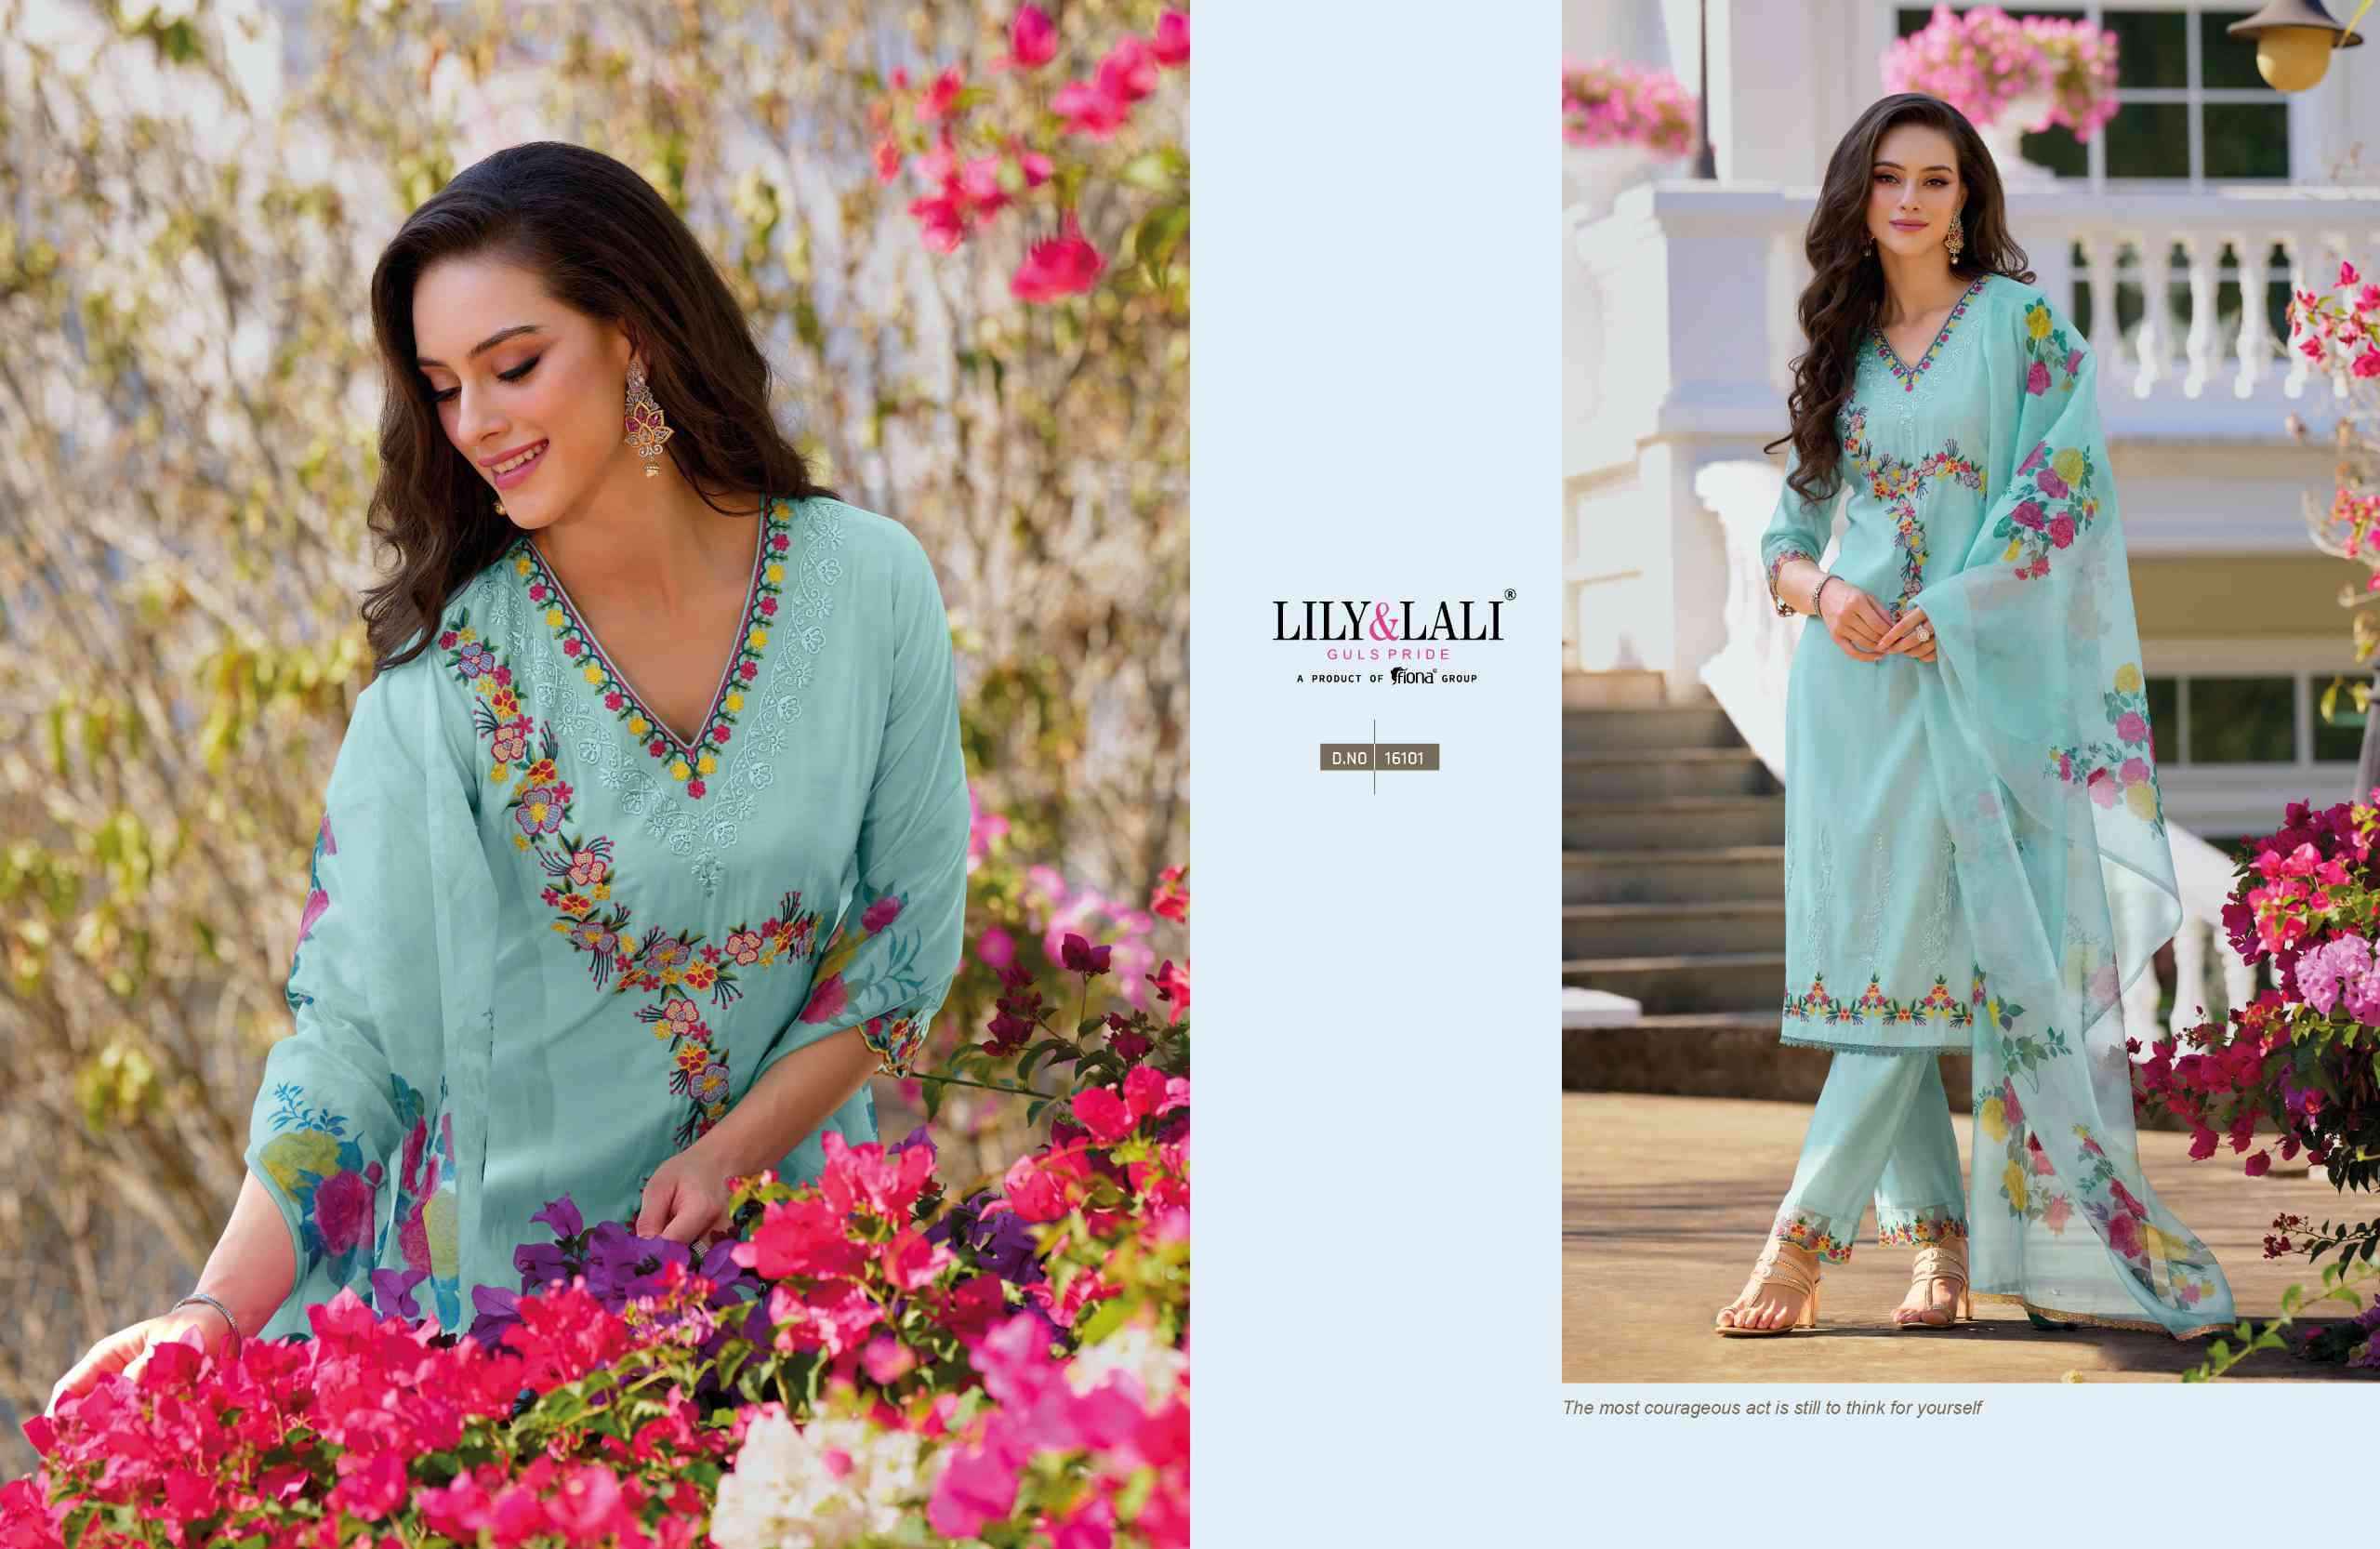 Lily And Lali Navyaa Organza Embroidered Readymade Suit (6 Pc Catalog)